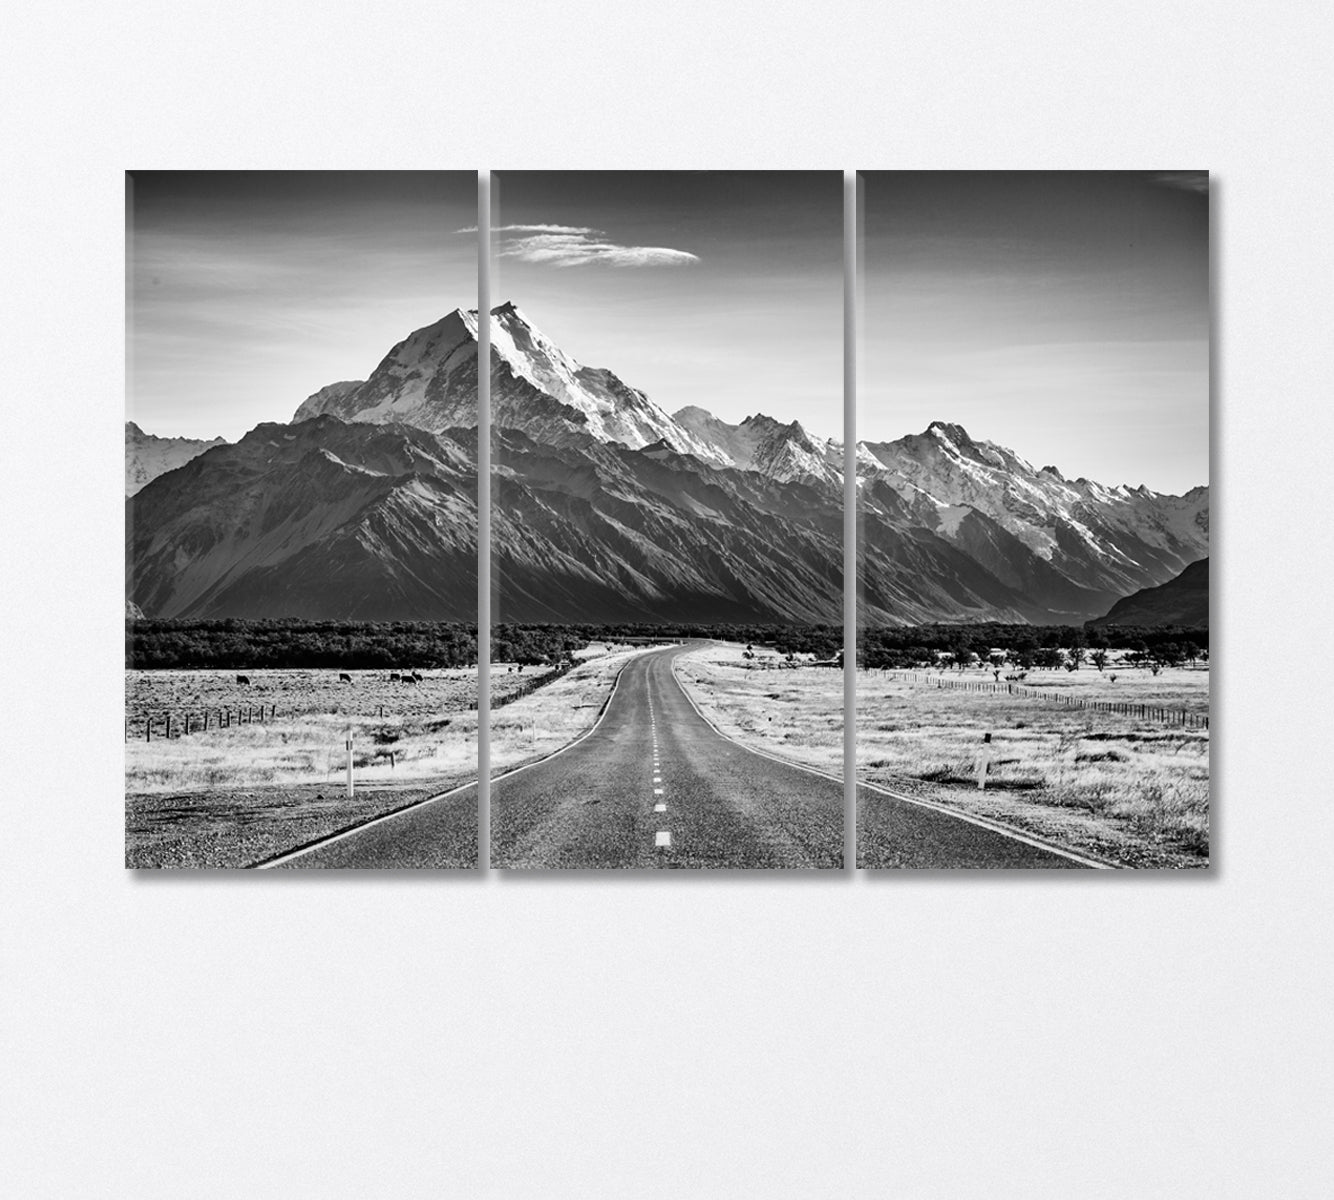 Road Leading Towards a Large Snow Capped Mountain Canvas Print-Canvas Print-CetArt-3 Panels-36x24 inches-CetArt